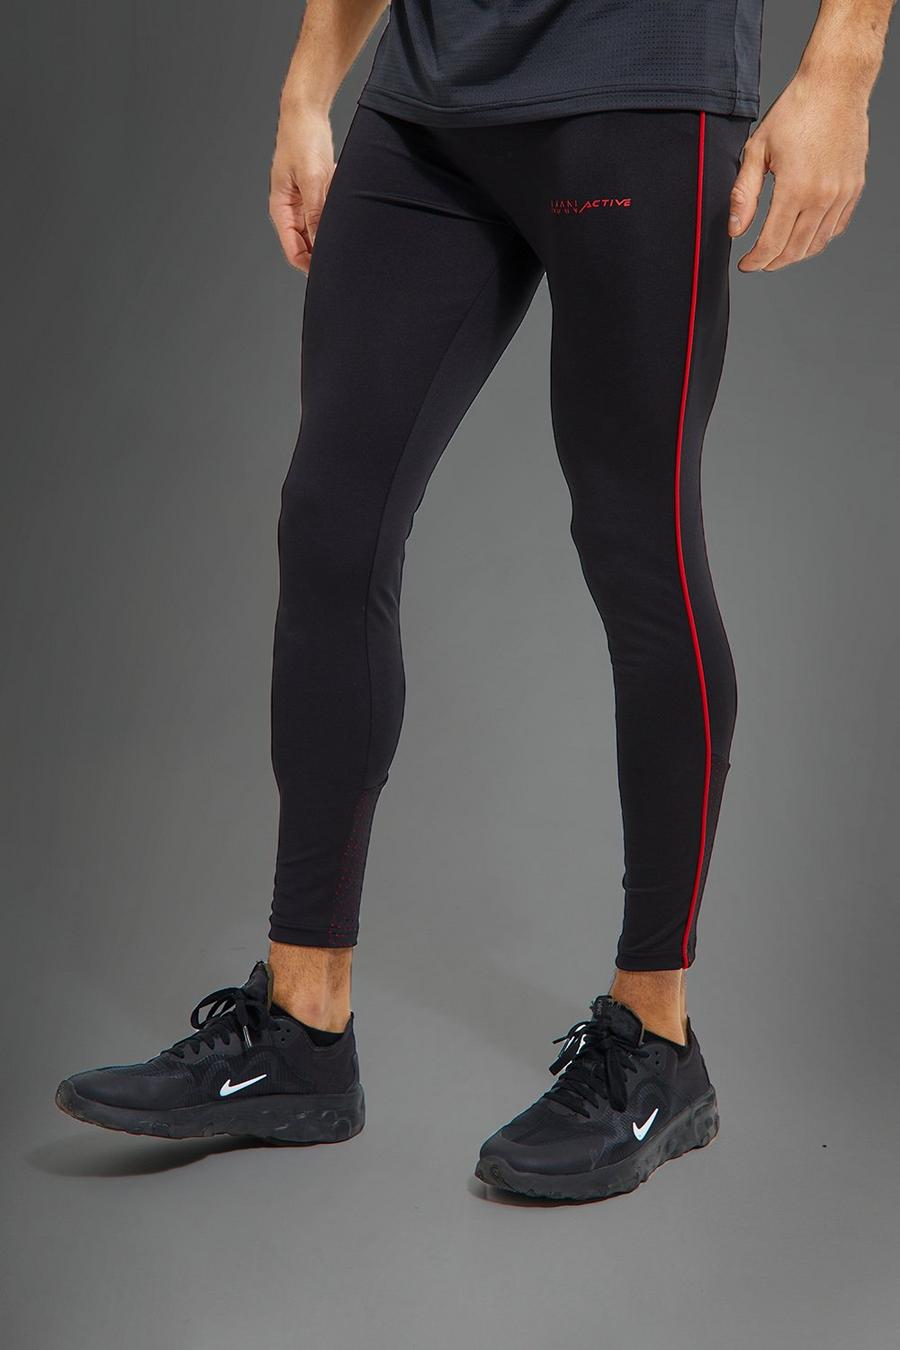 Activewear Mens Sports Leggings Wicking Material with Panelling 